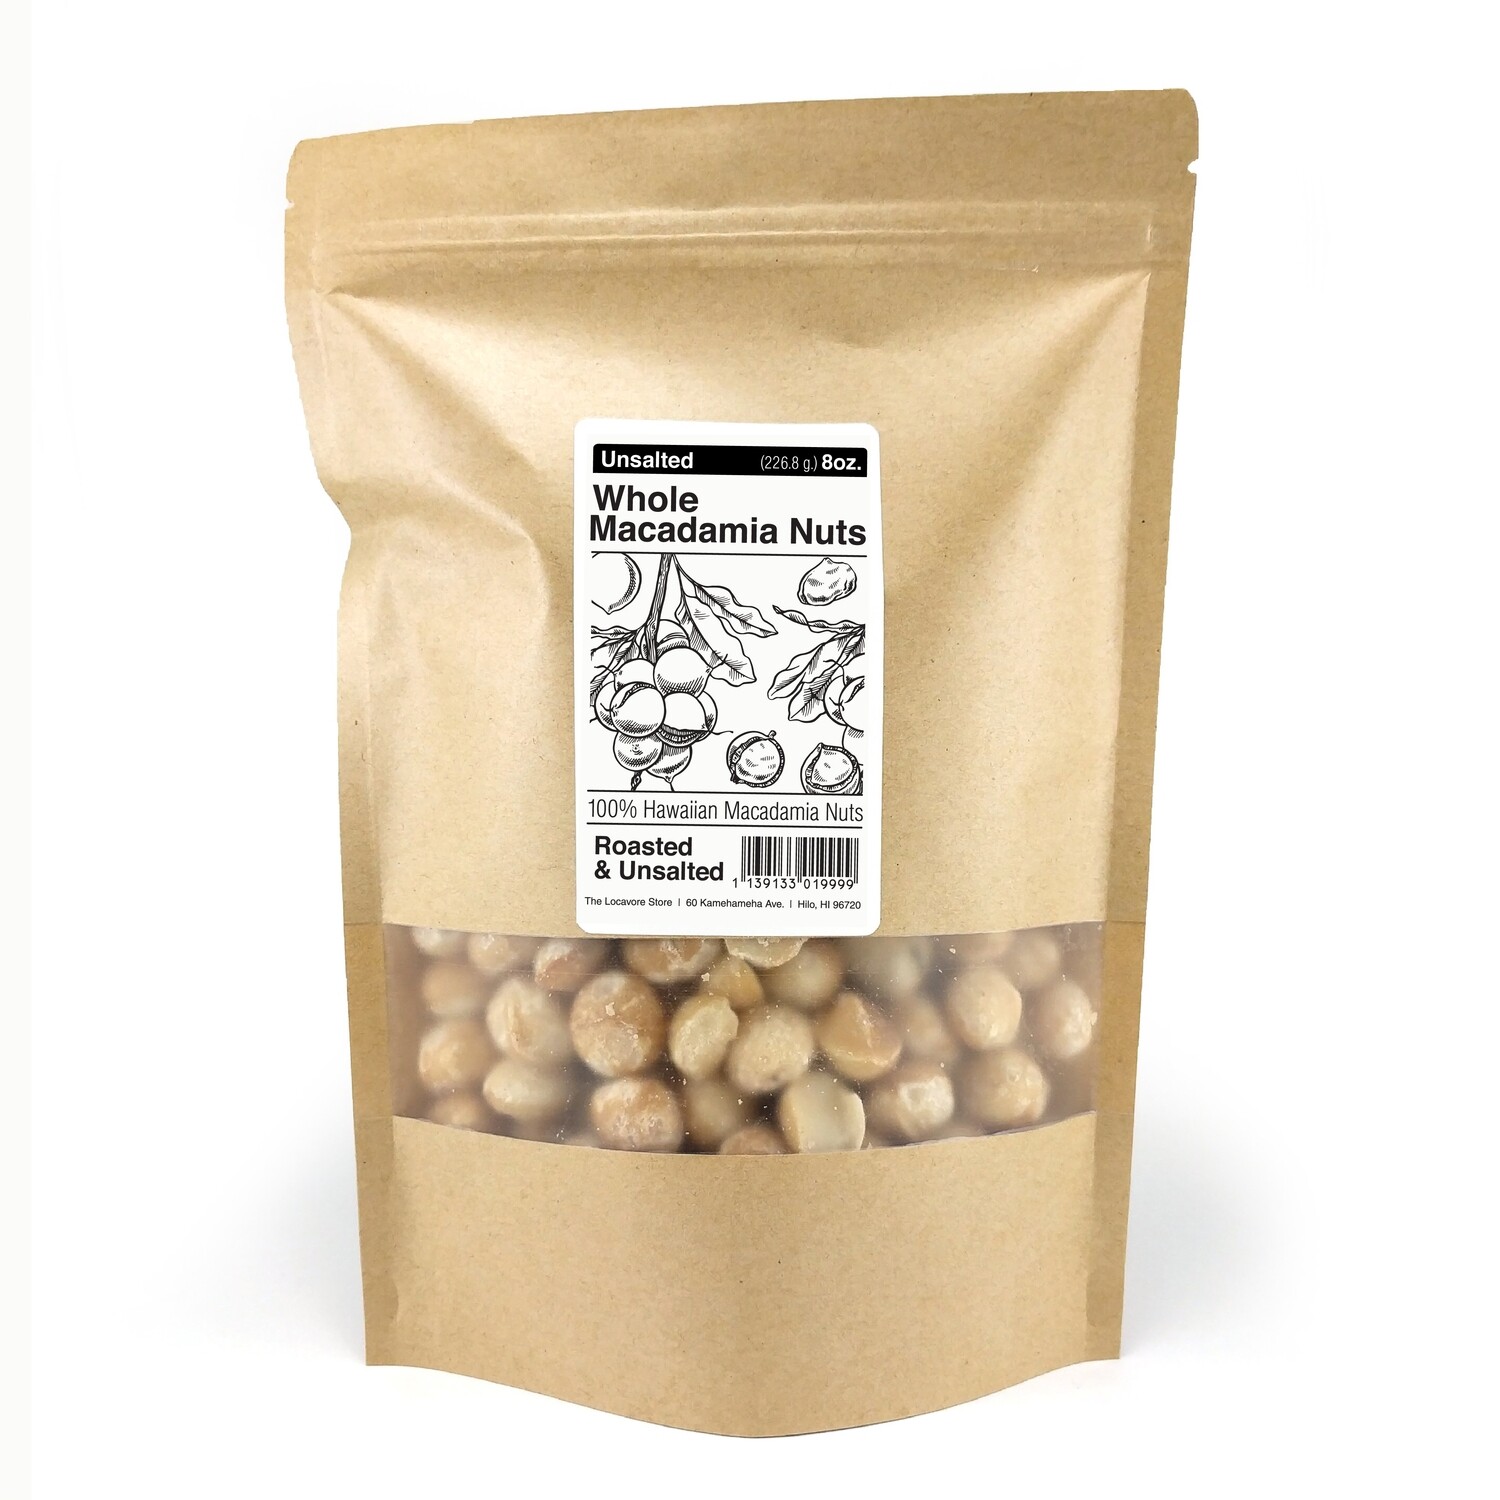 Macadamia Nuts, The Locavore Store - Unsalted (16 Oz.)